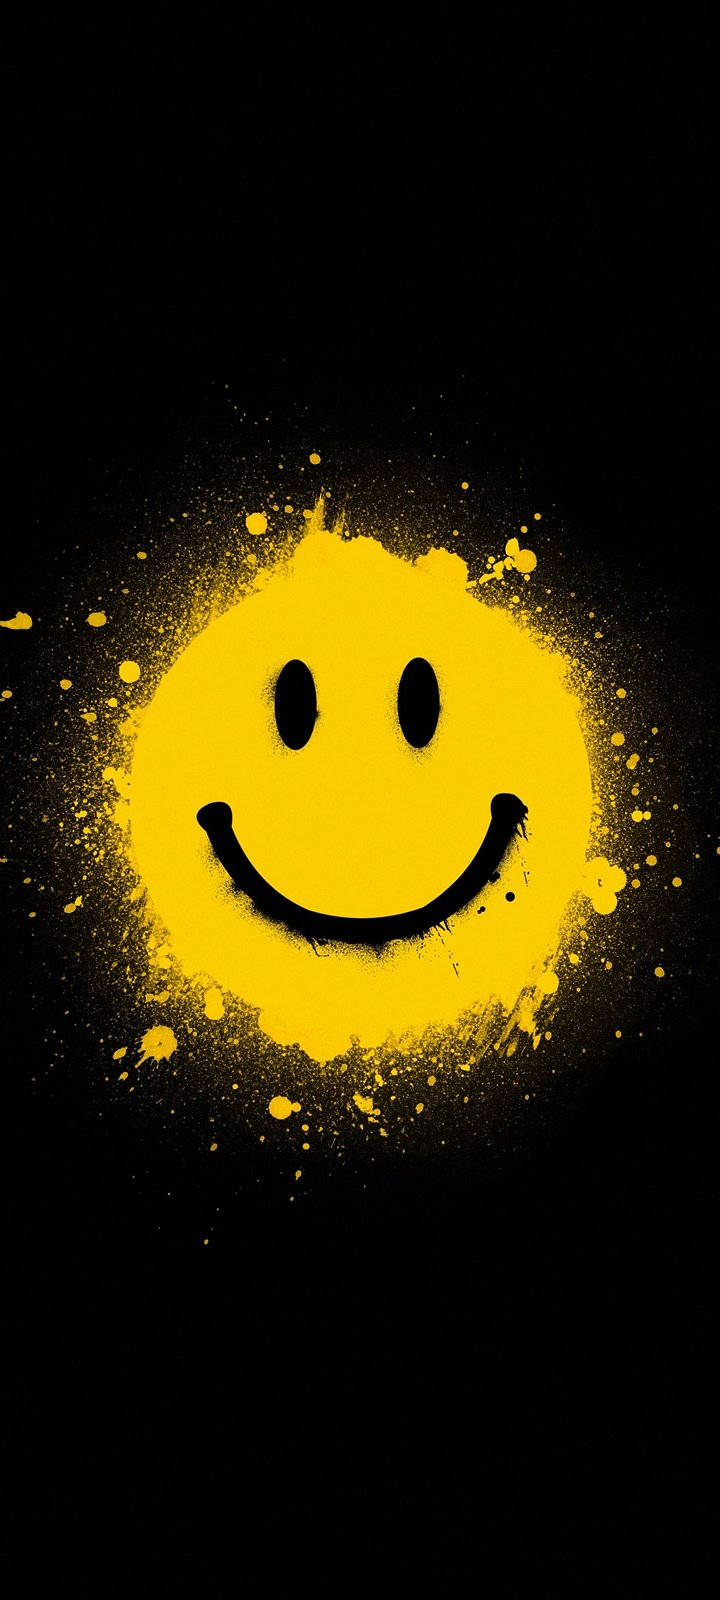 Smiley Face Spray Paint Background